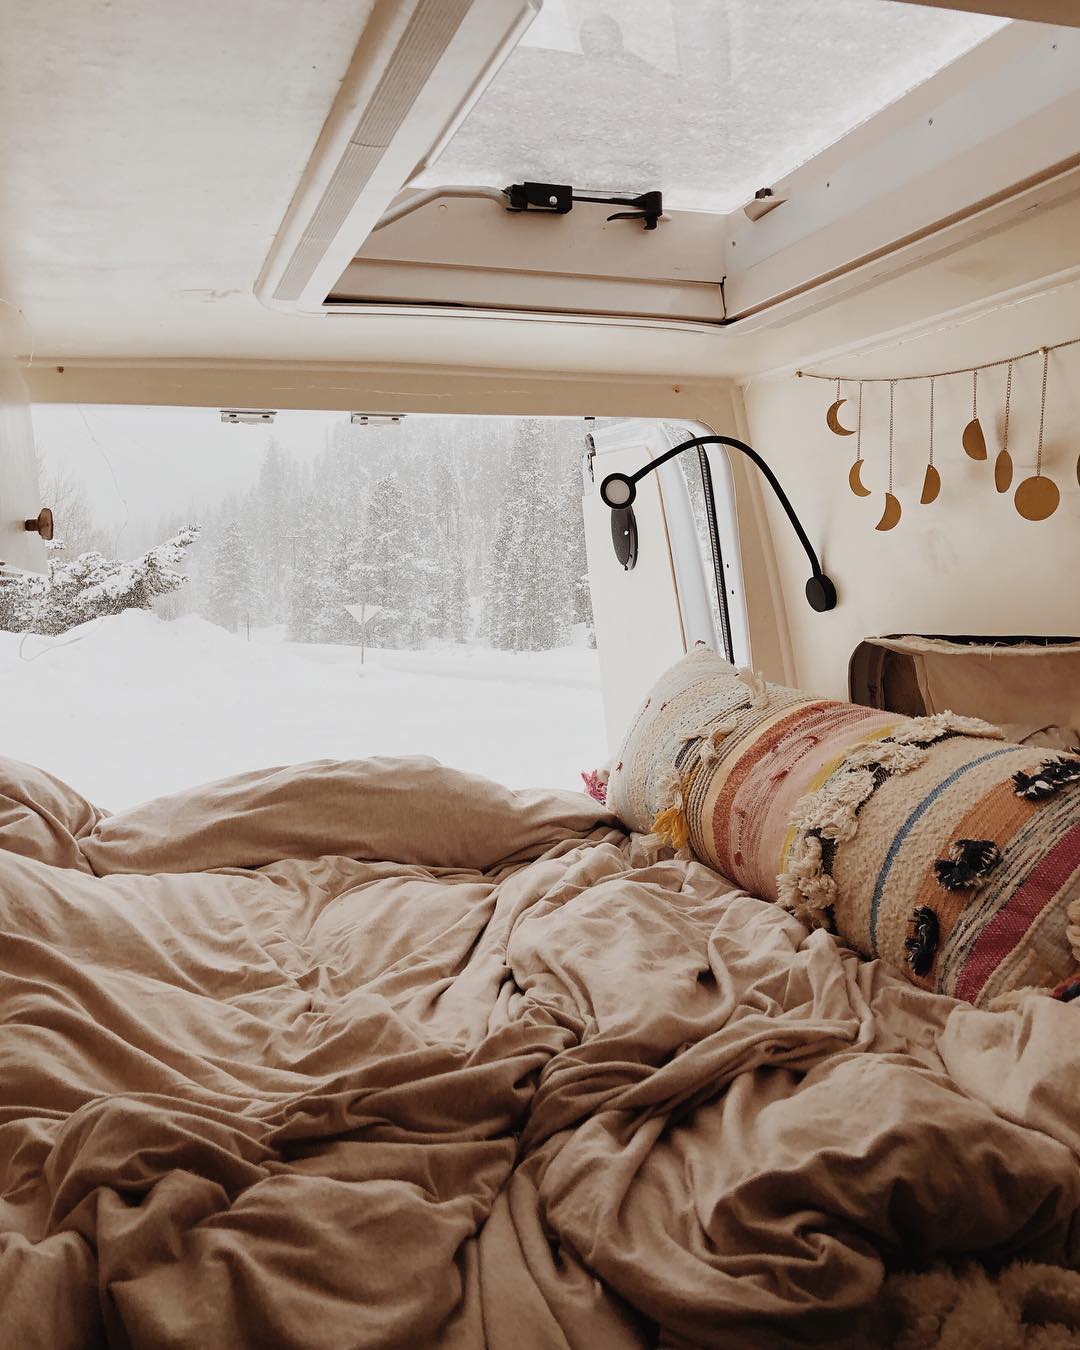 Van bed with a snow storm in the background. Photo by Instagram user @dynamoultima